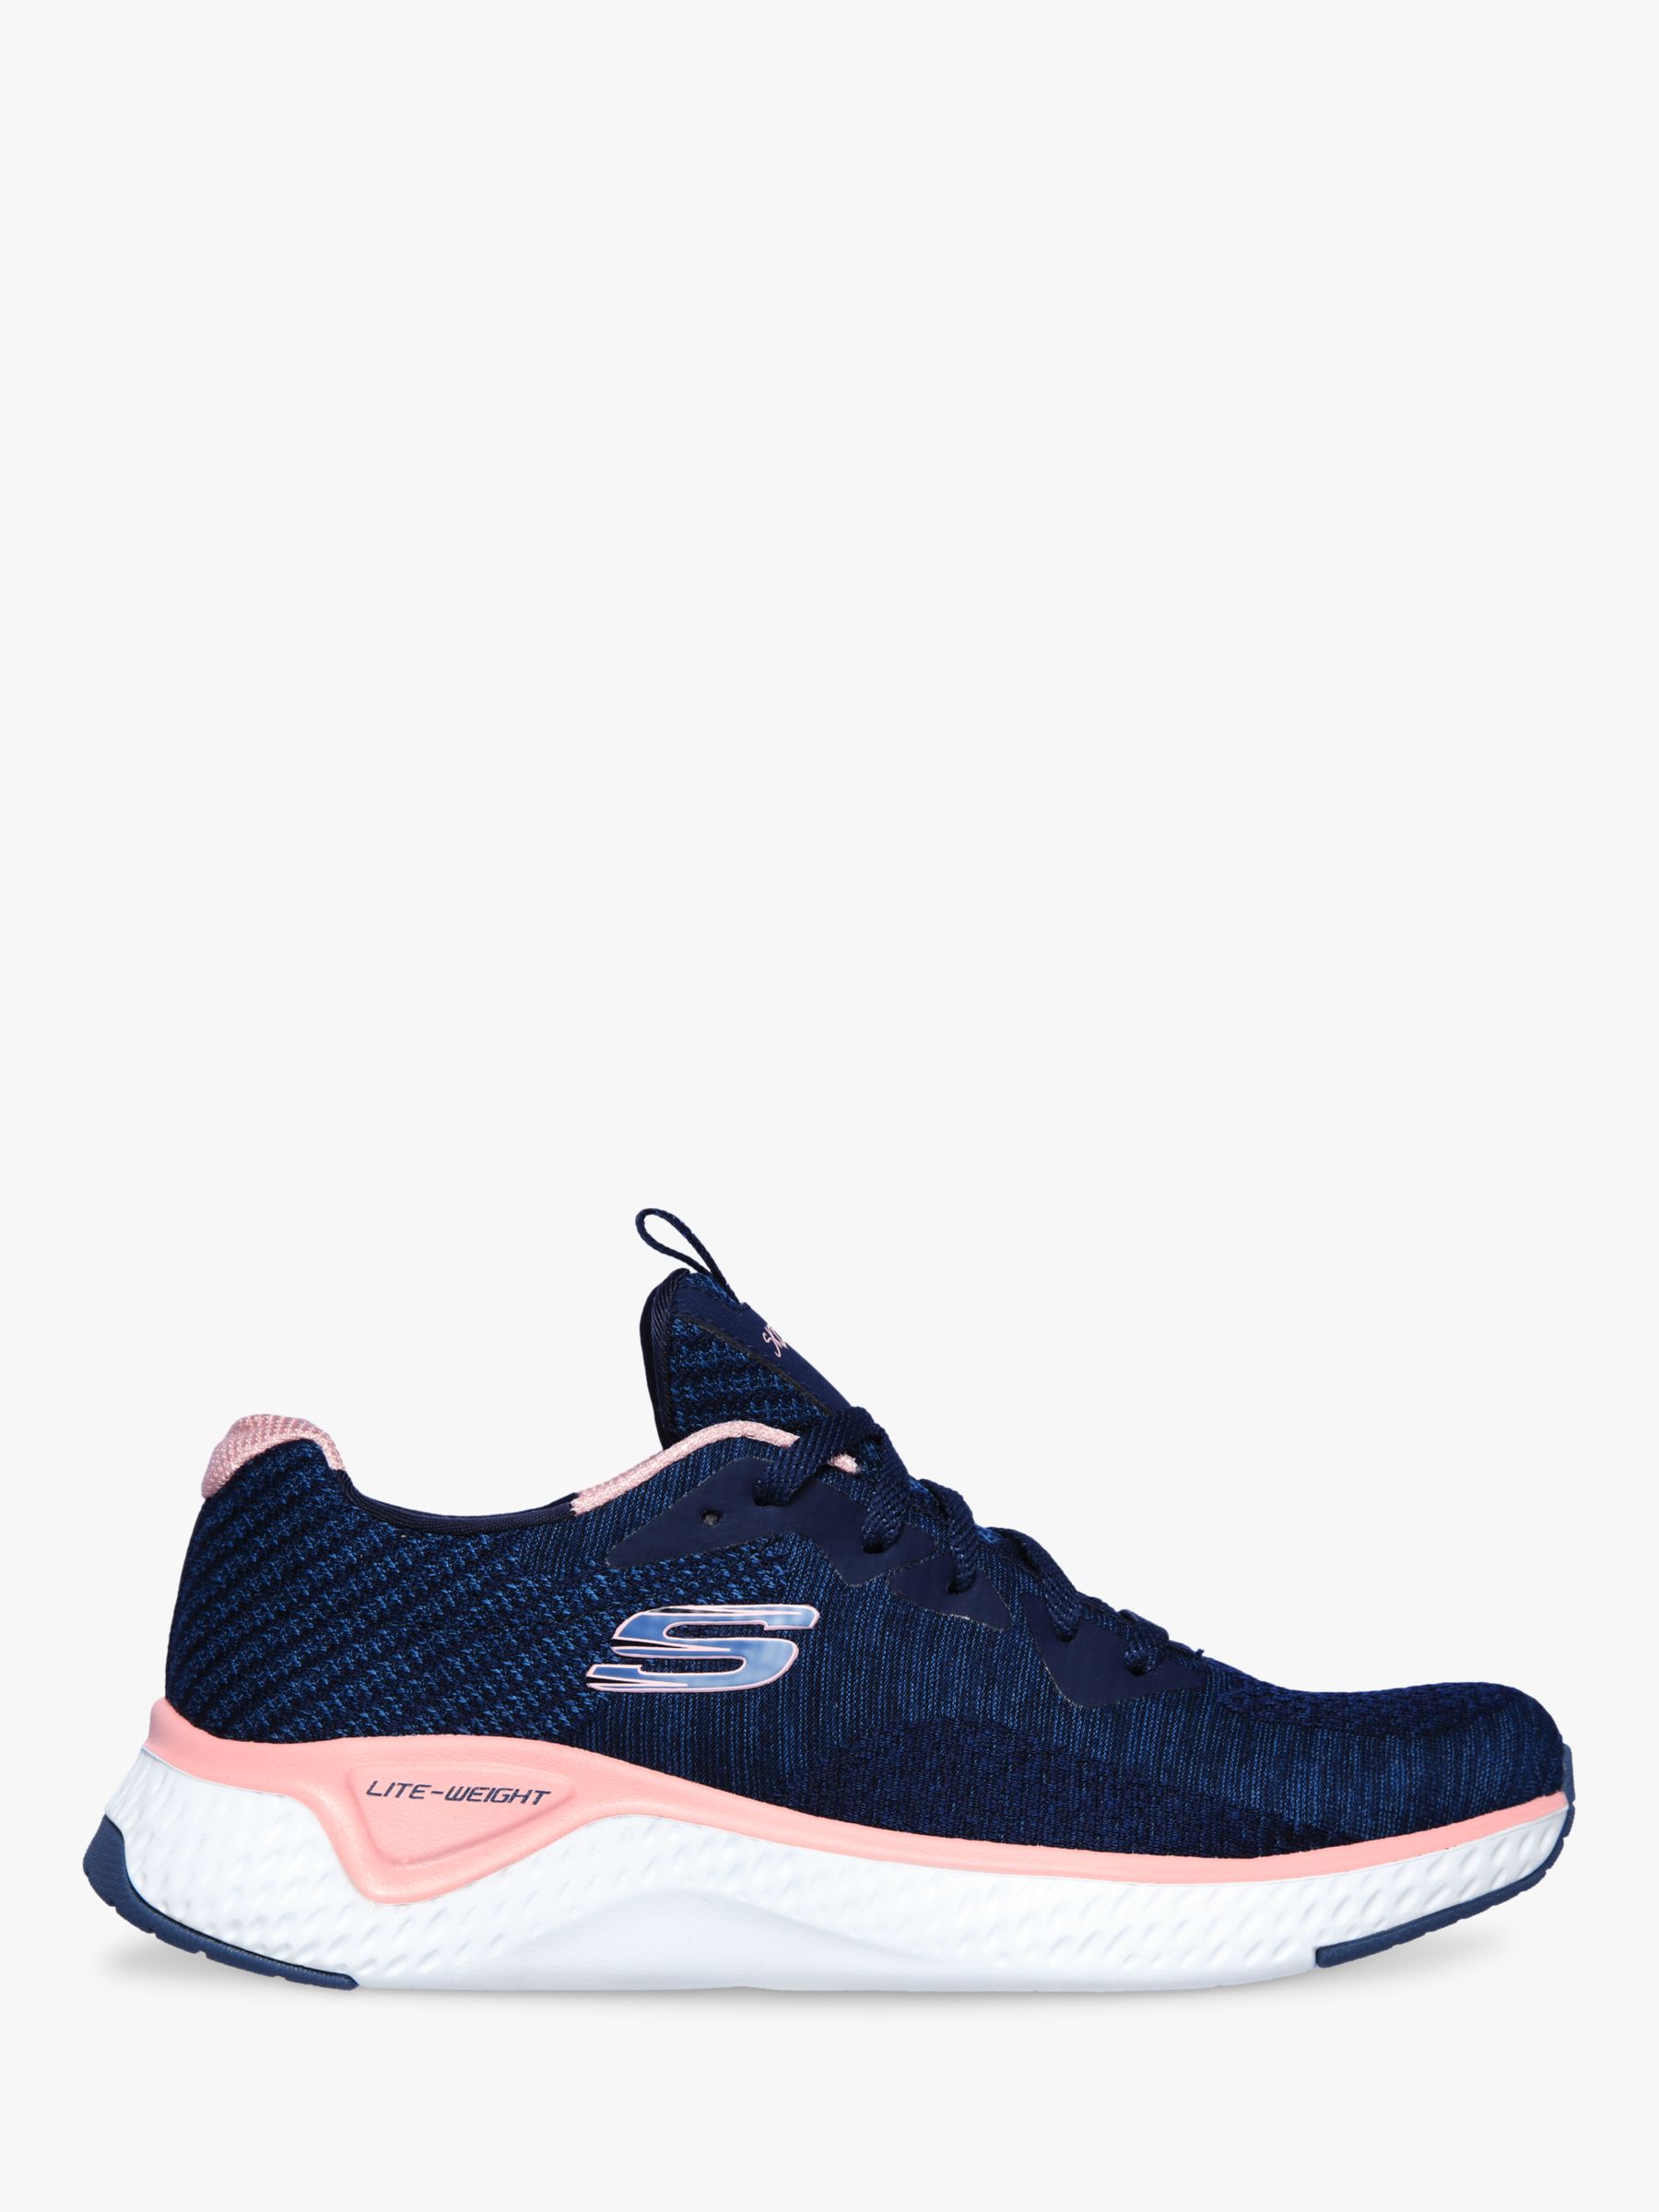 skechers navy and pink trainers